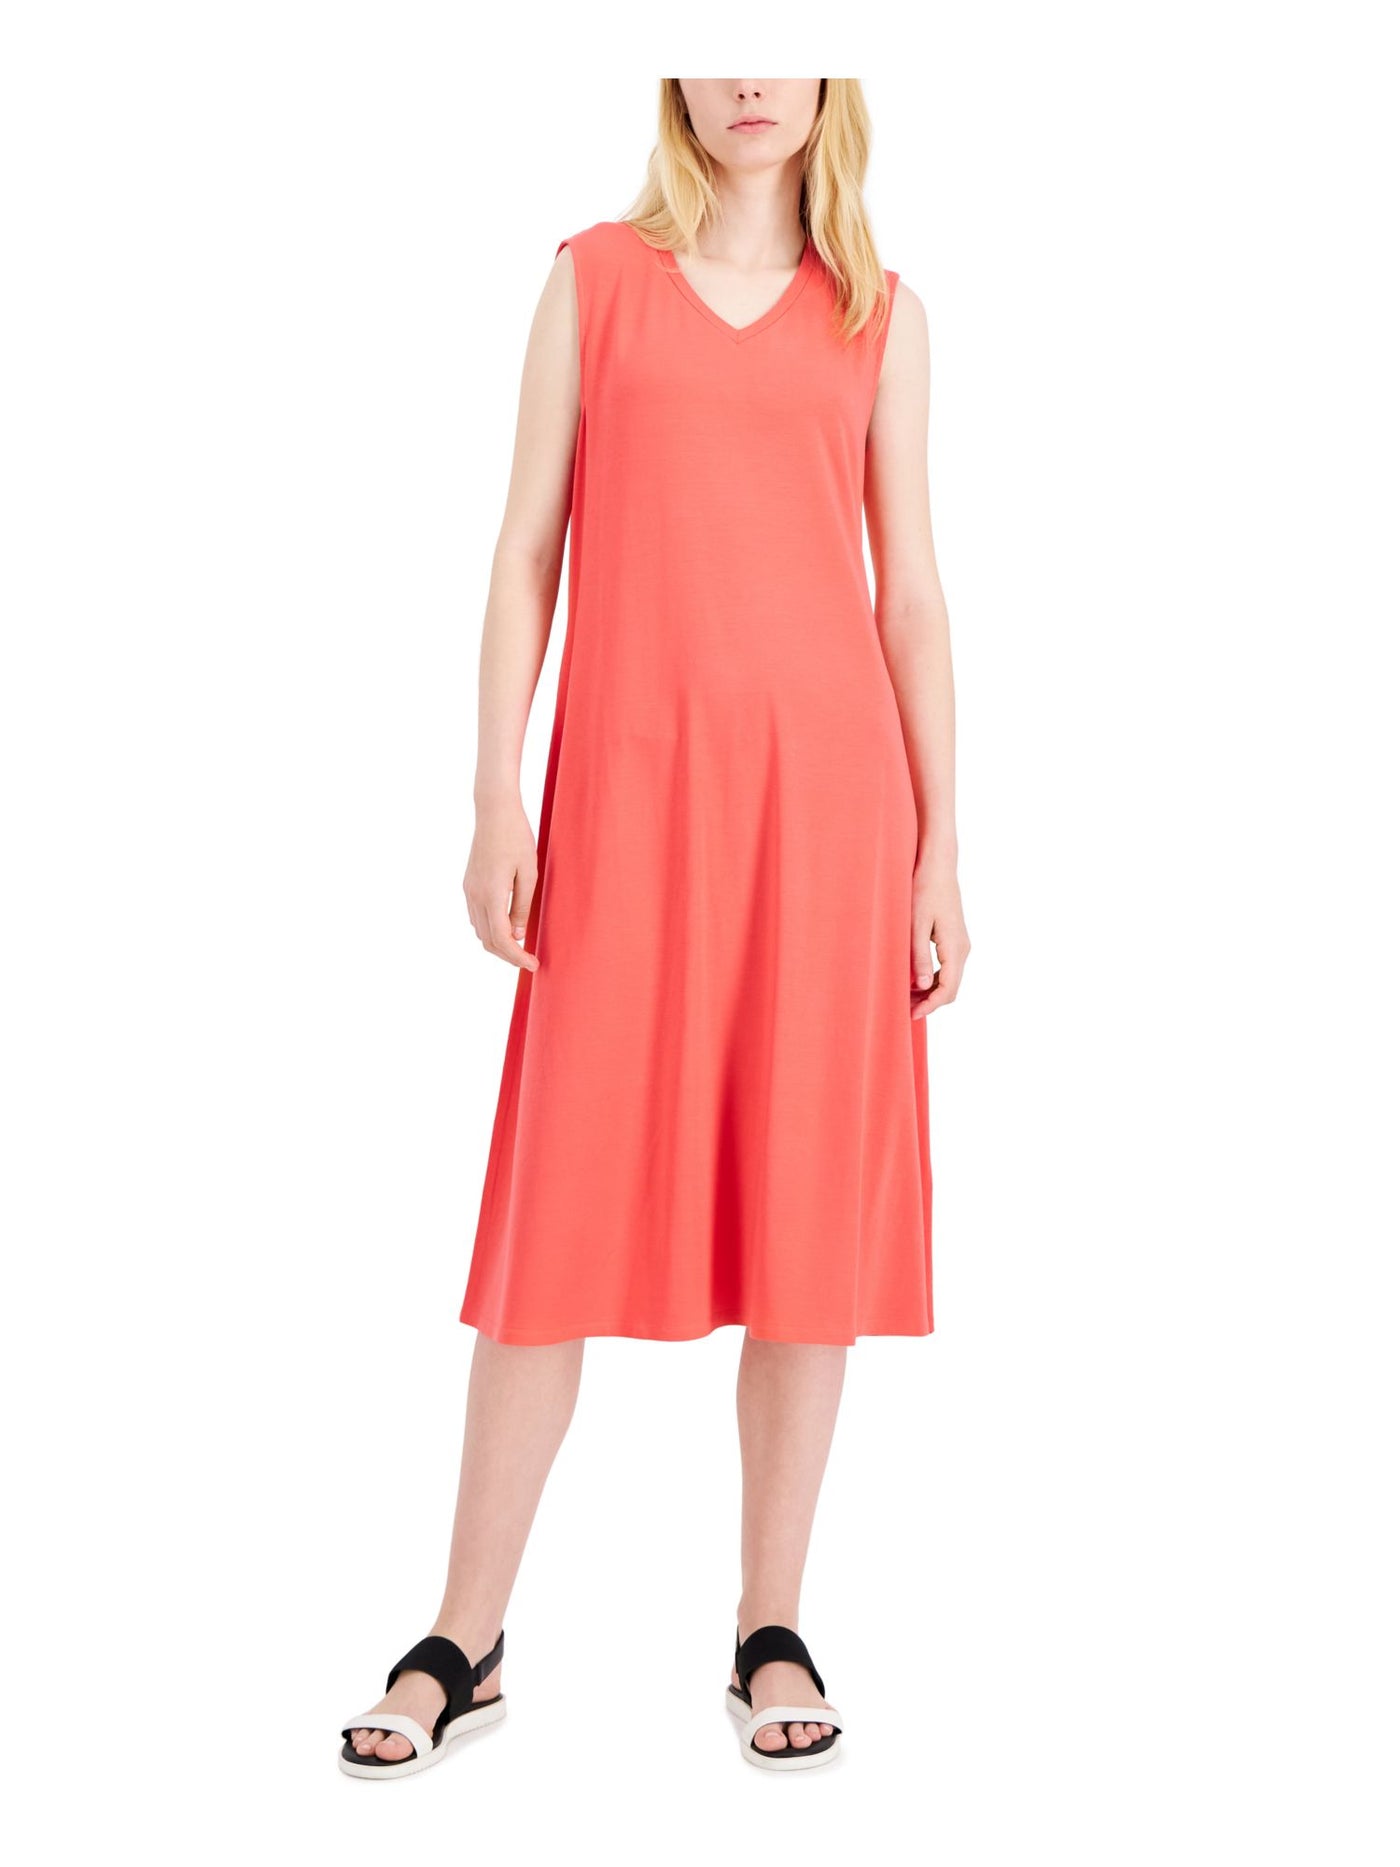 EILEEN FISHER Womens Coral Unlined Pullover Sleeveless V Neck Below The Knee Shift Dress Petites PM